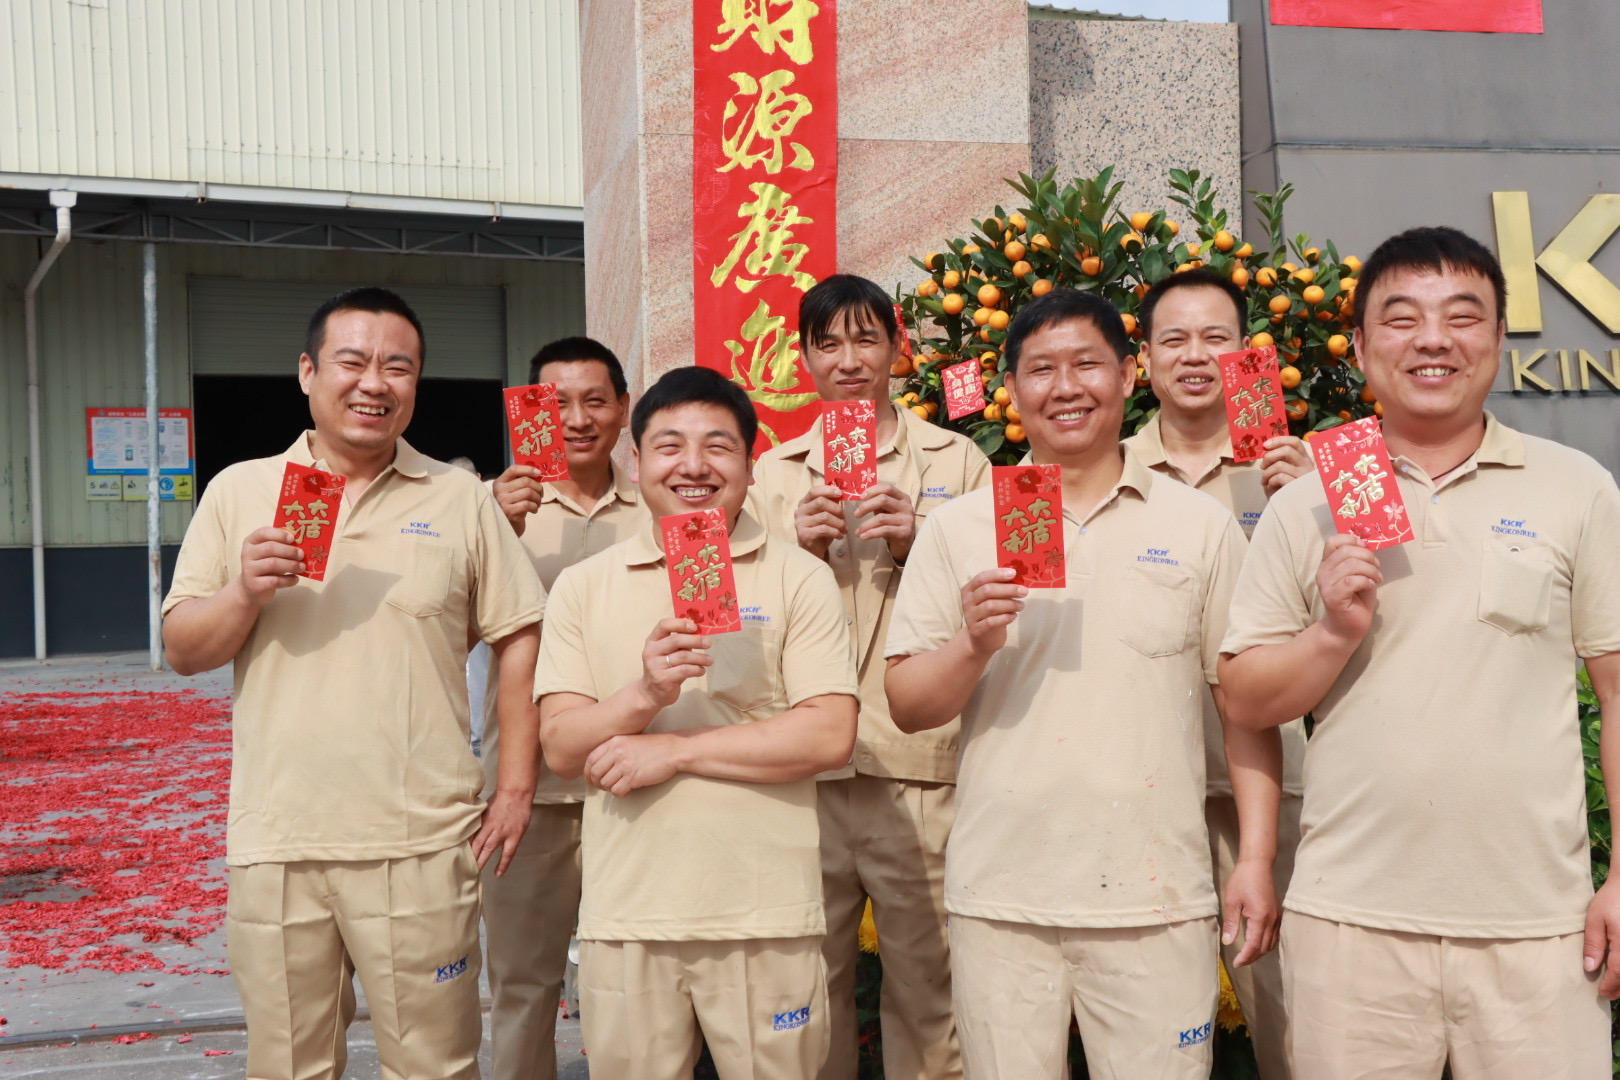 the workers smiled happily when they received red envelopes